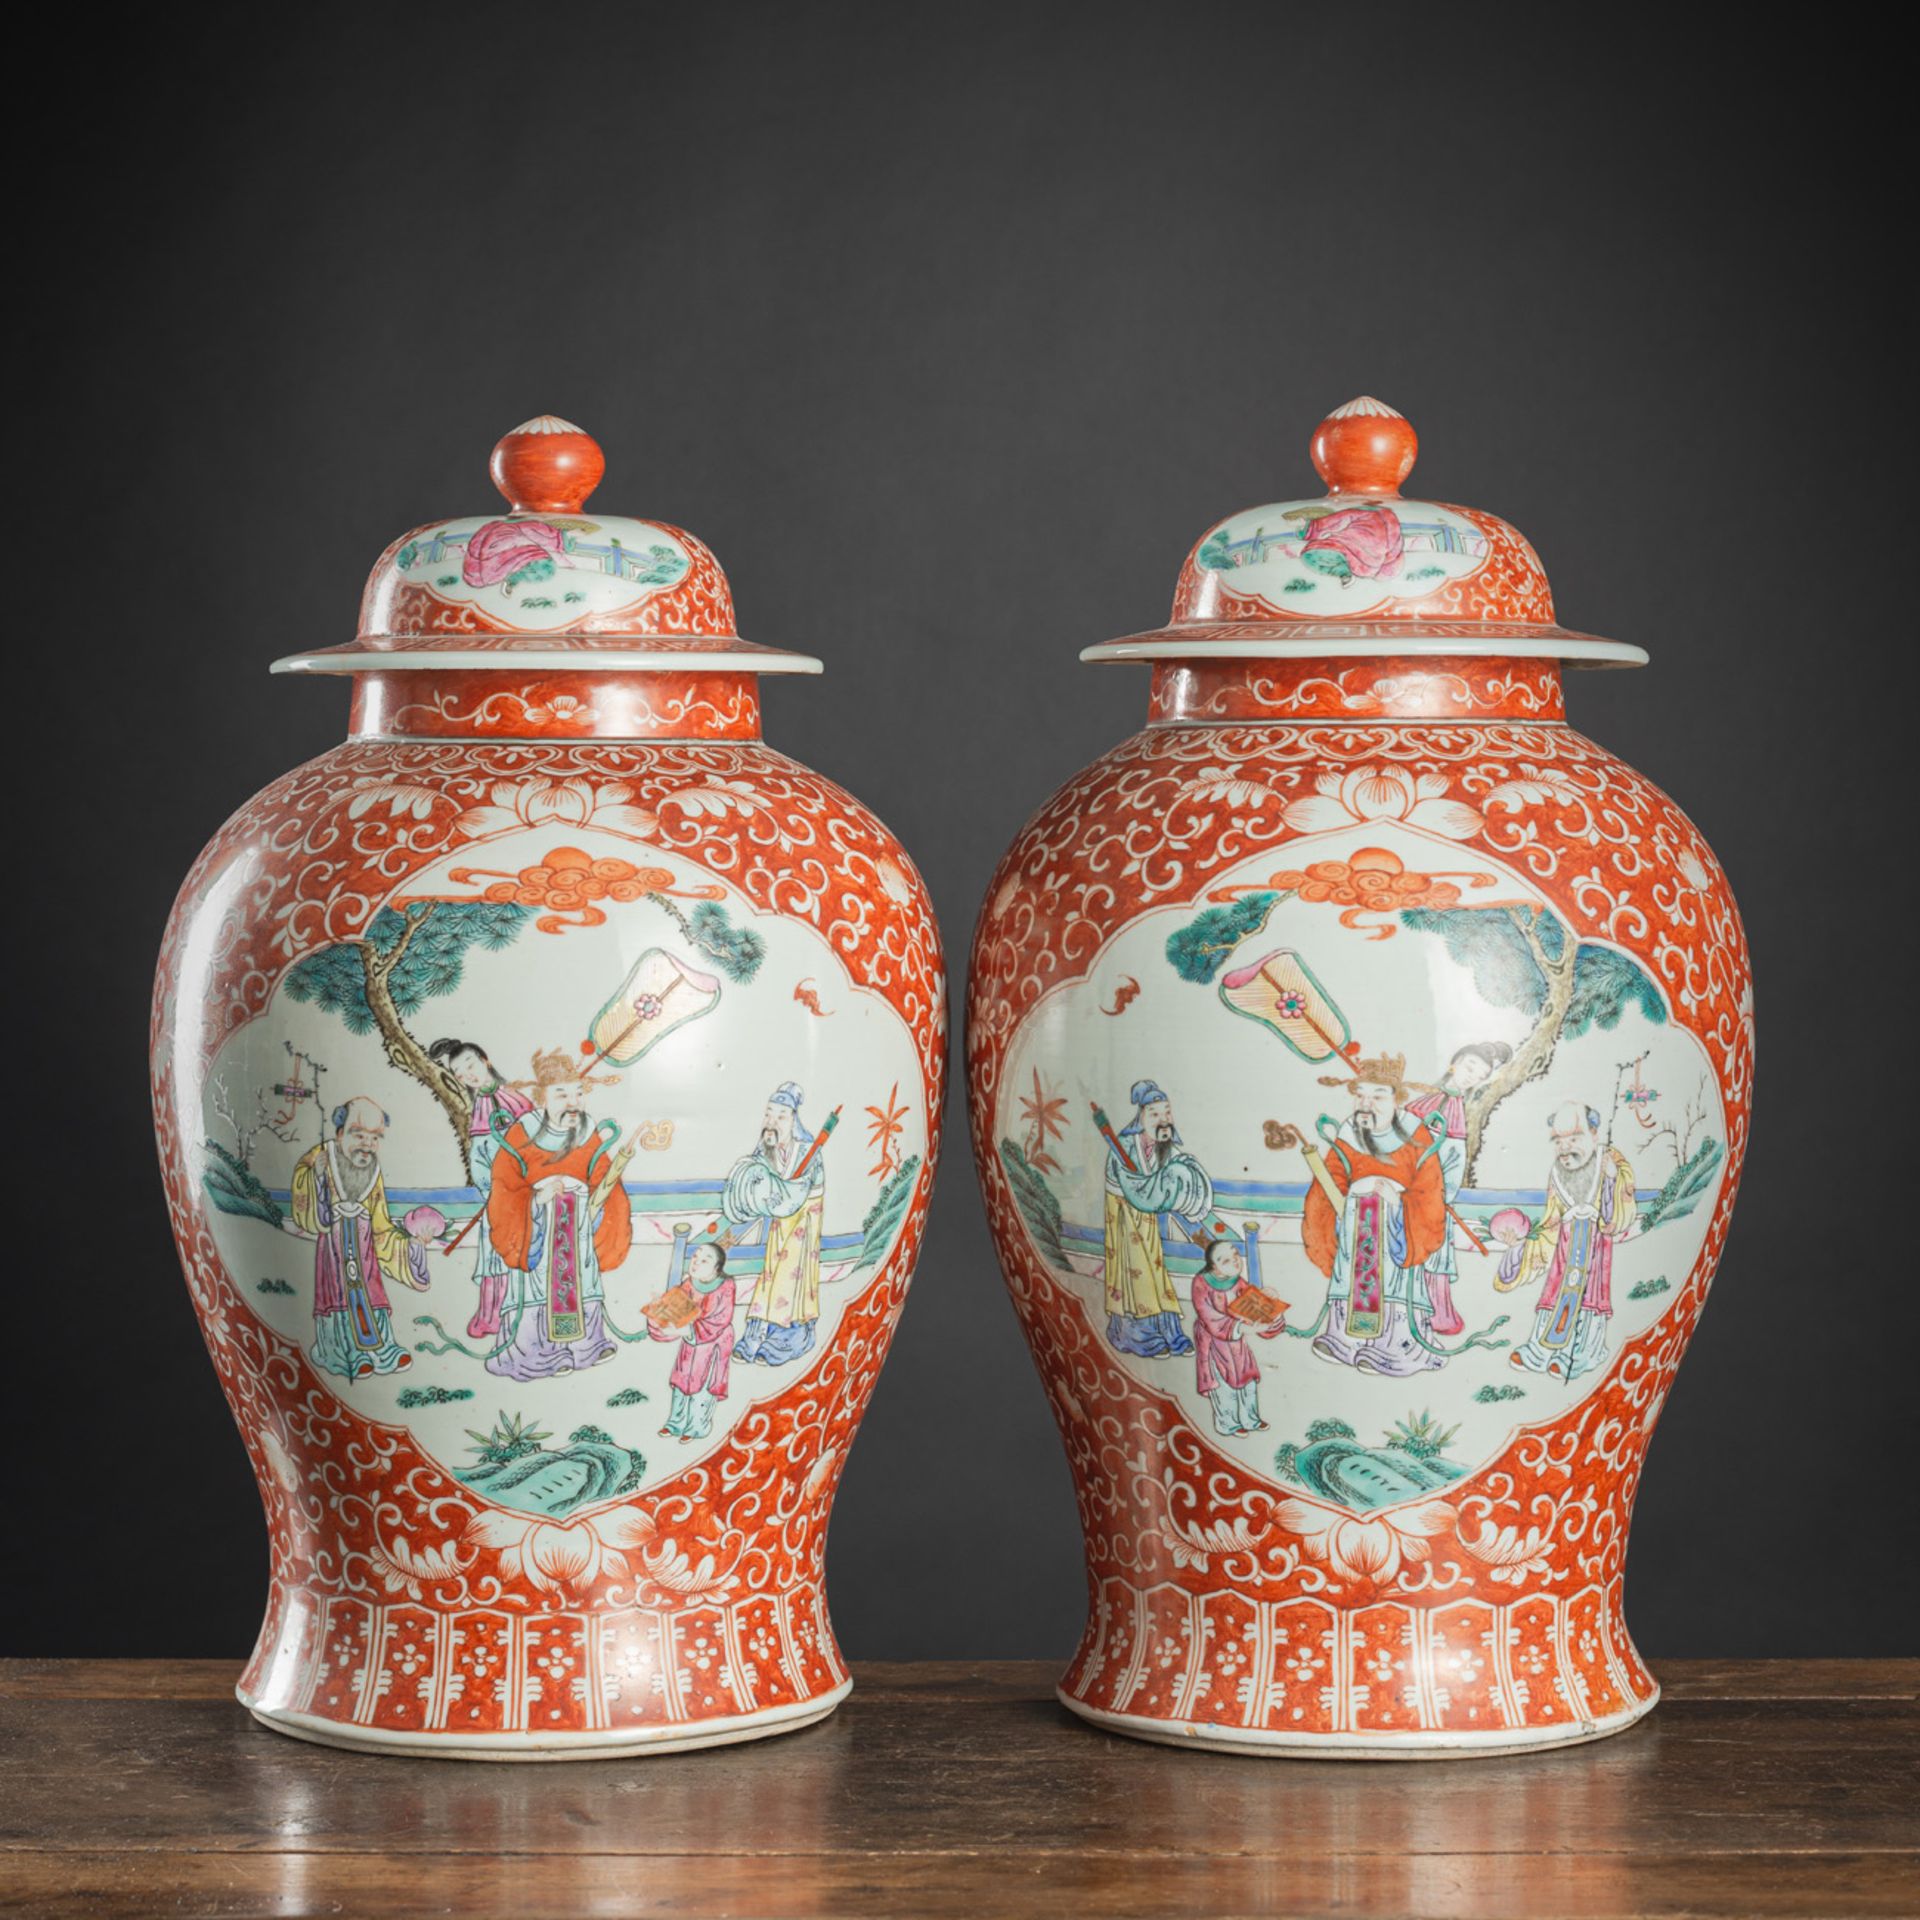 A PAIR OF IRON-RED-GROUND 'FAMILLE ROSE' FIGURAL RESERVES PORCELAIN VASES AND COVERS